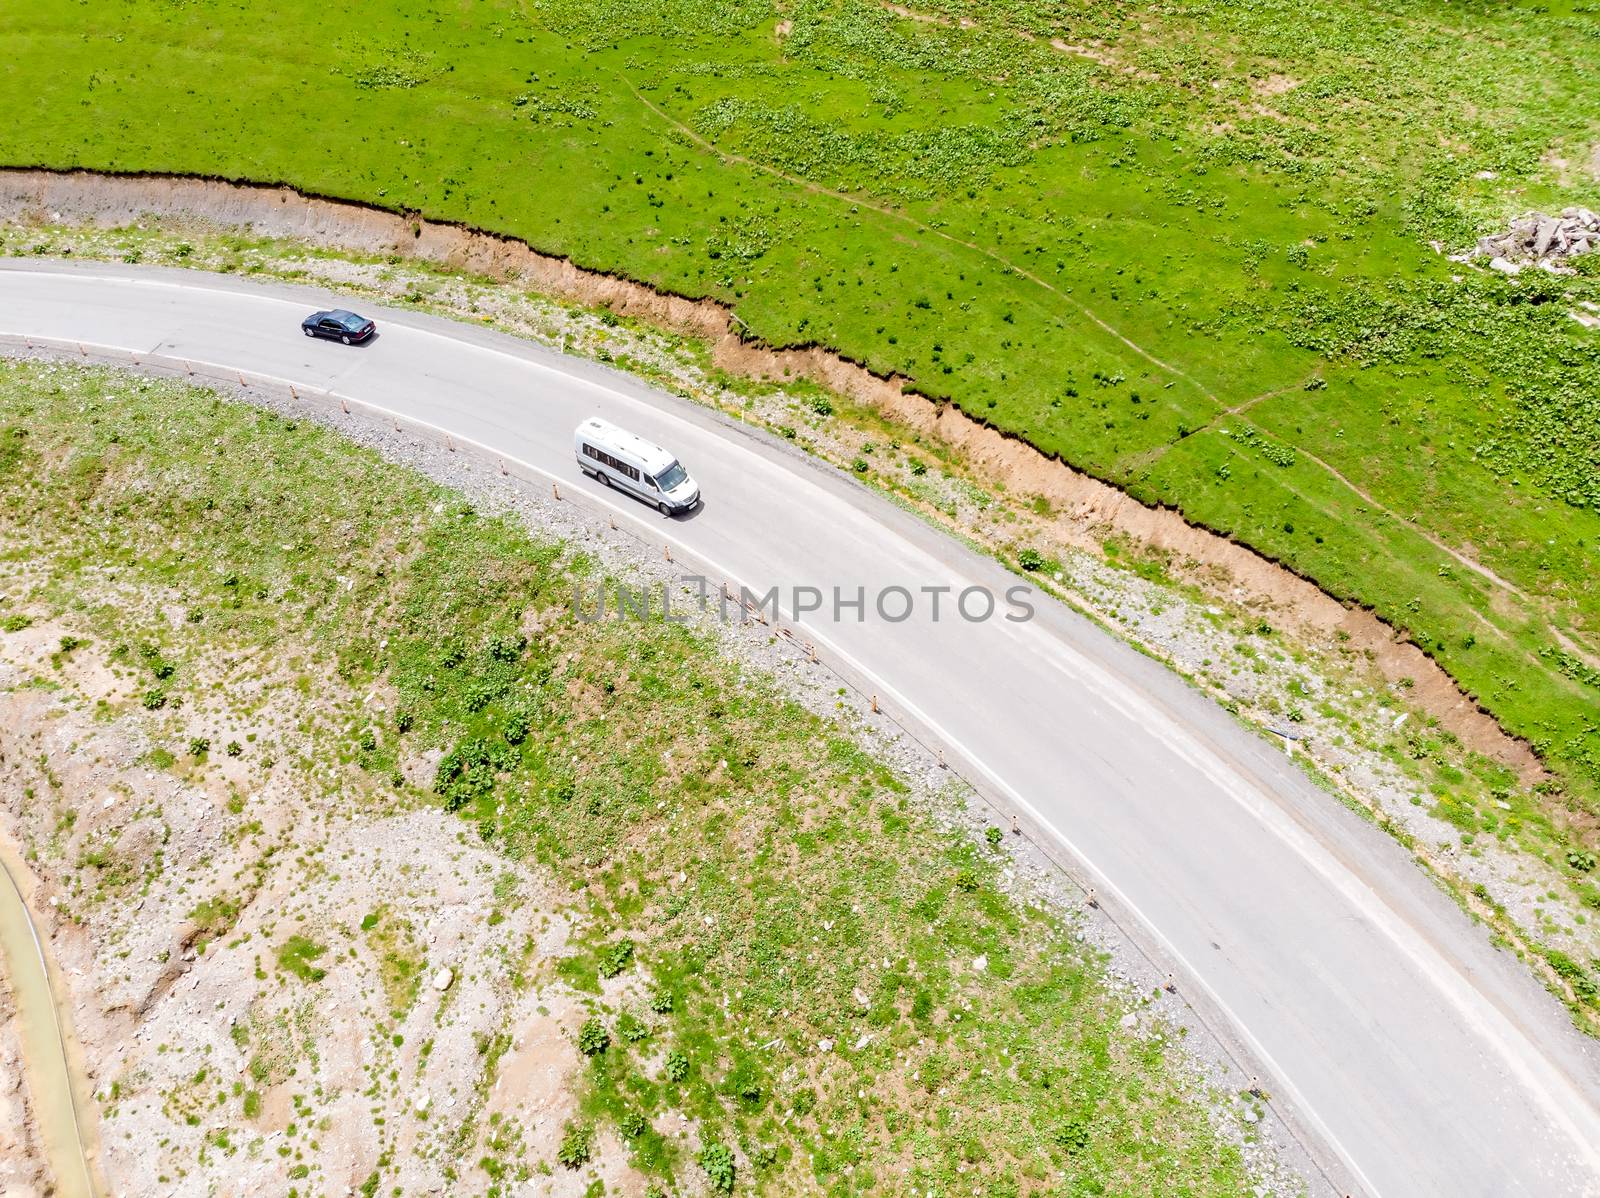 Top view of the road serpentine in the mountains, on the road ca by kosmsos111